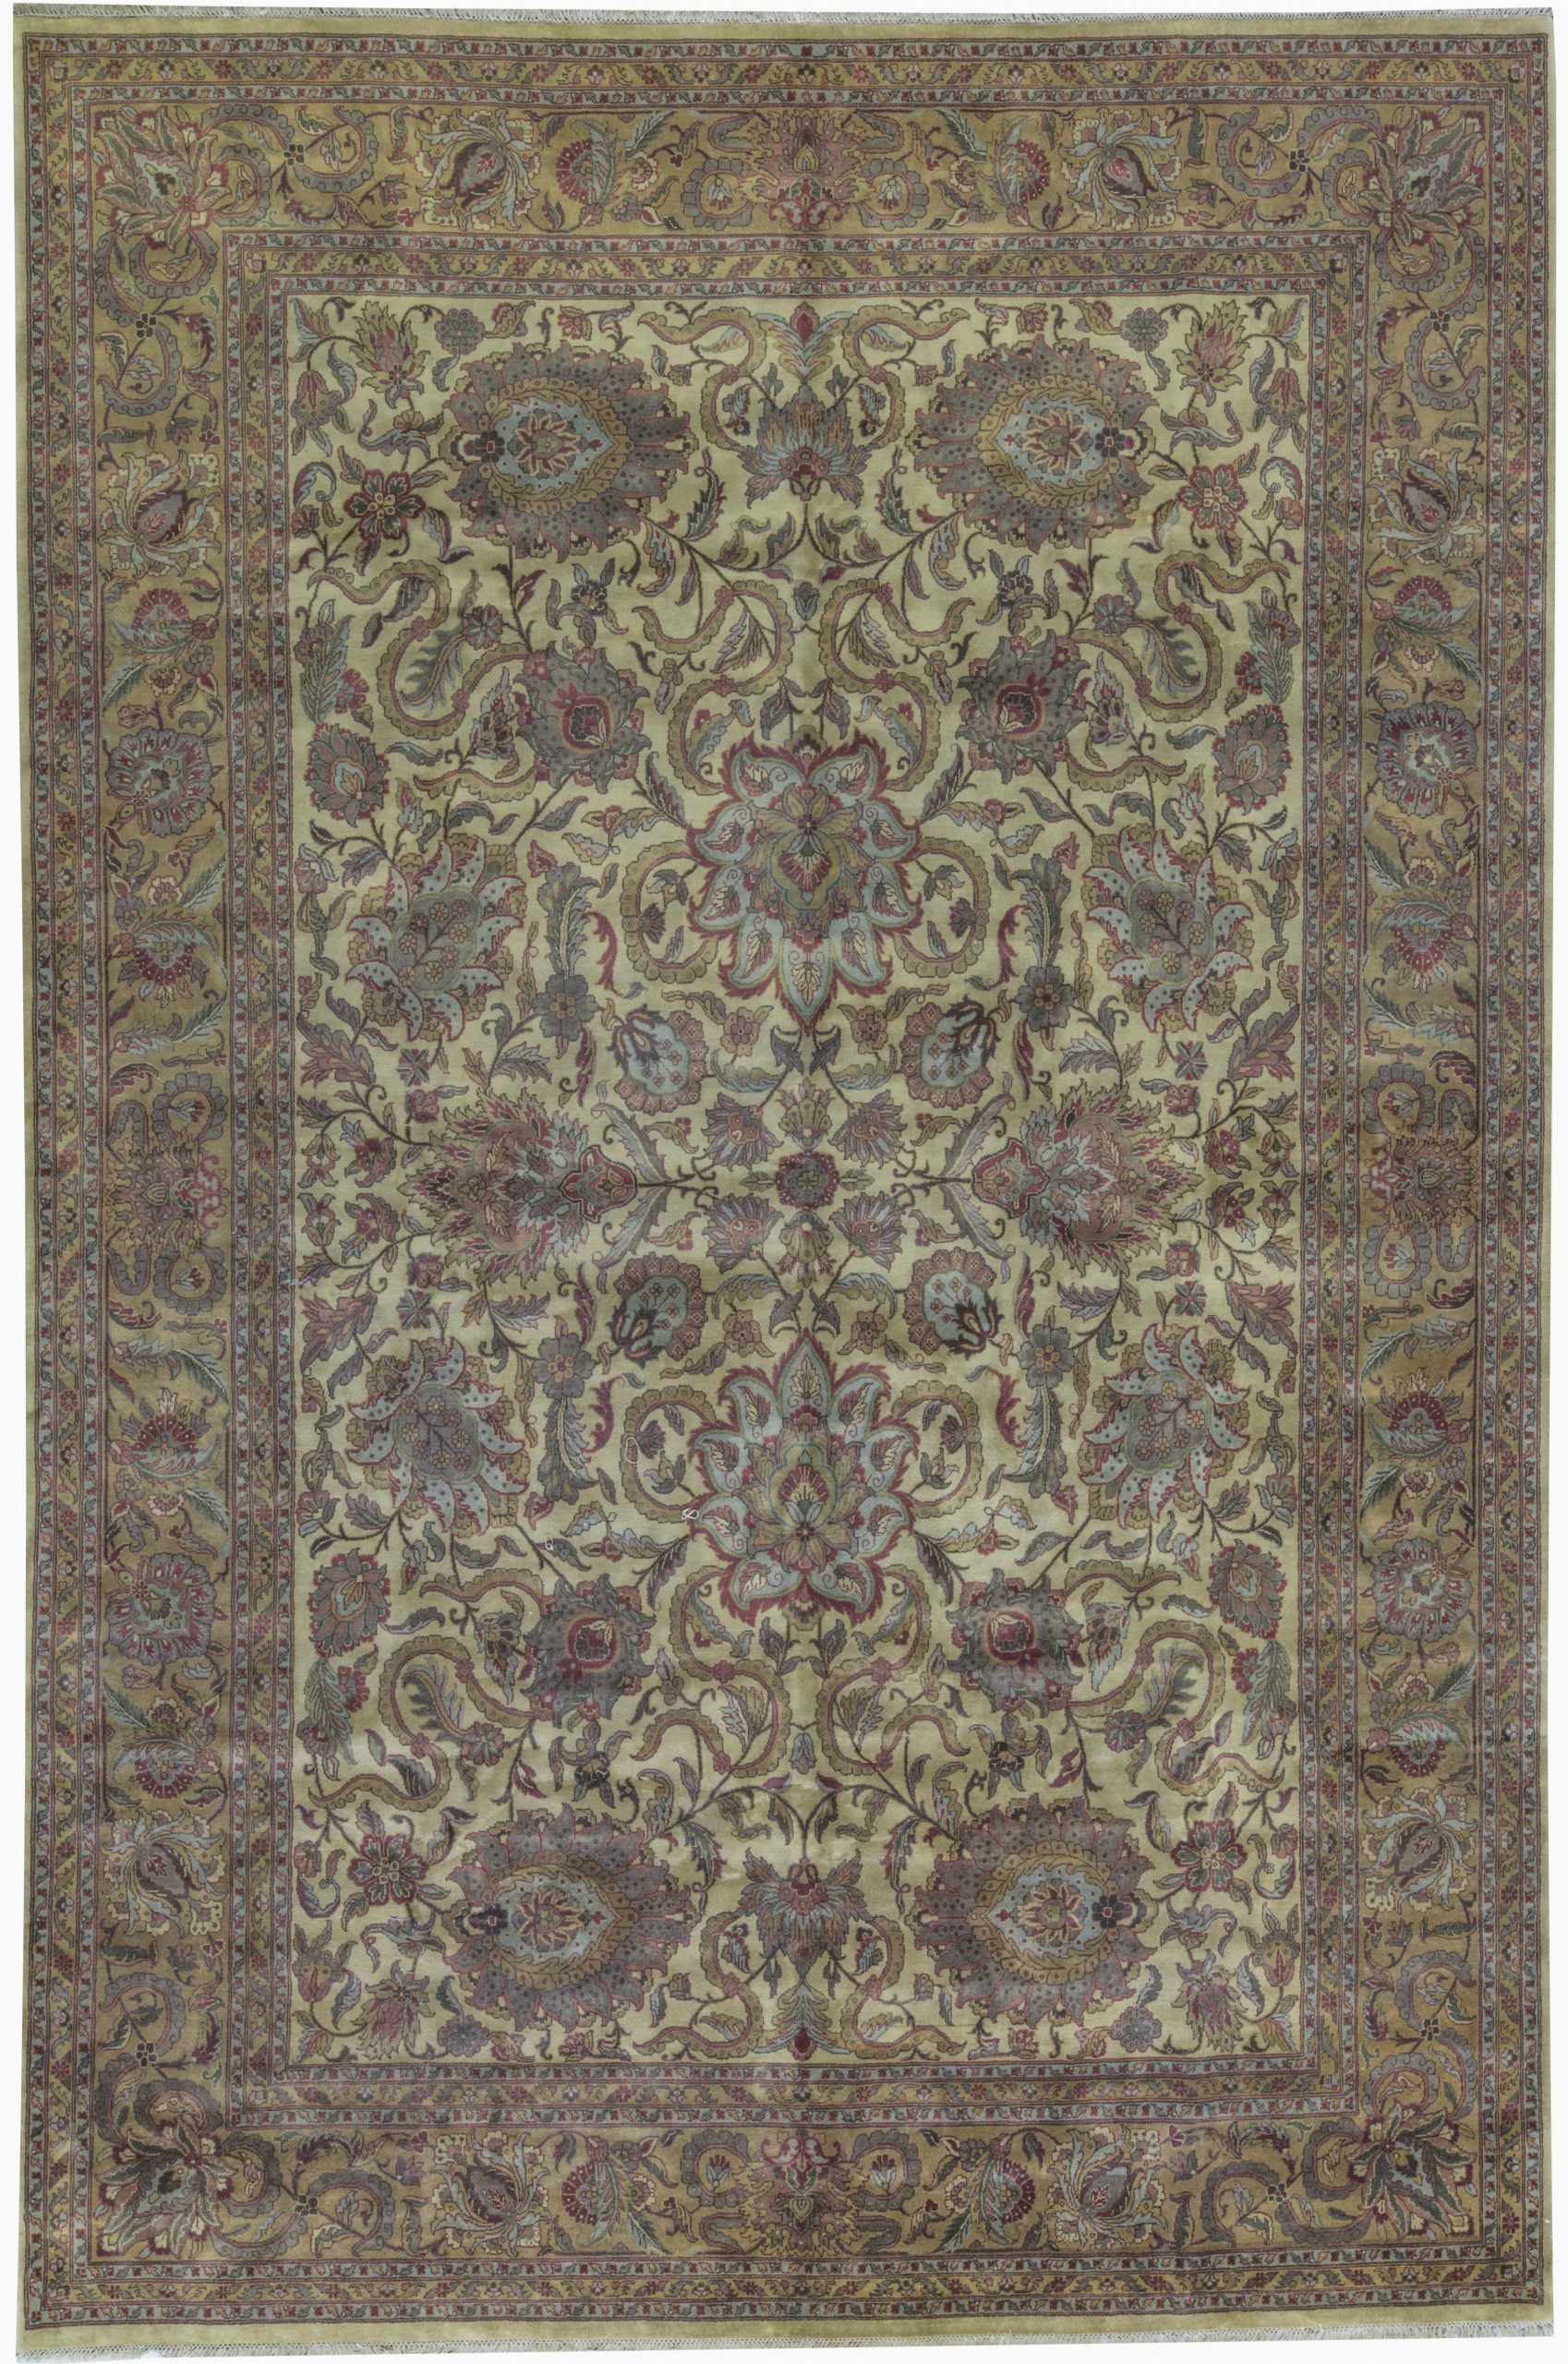 Large area Rugs 12 X 18 E Of A Kind Crown Hand Knotted before 1900 Beige 12 X 18 2" Wool area Rug